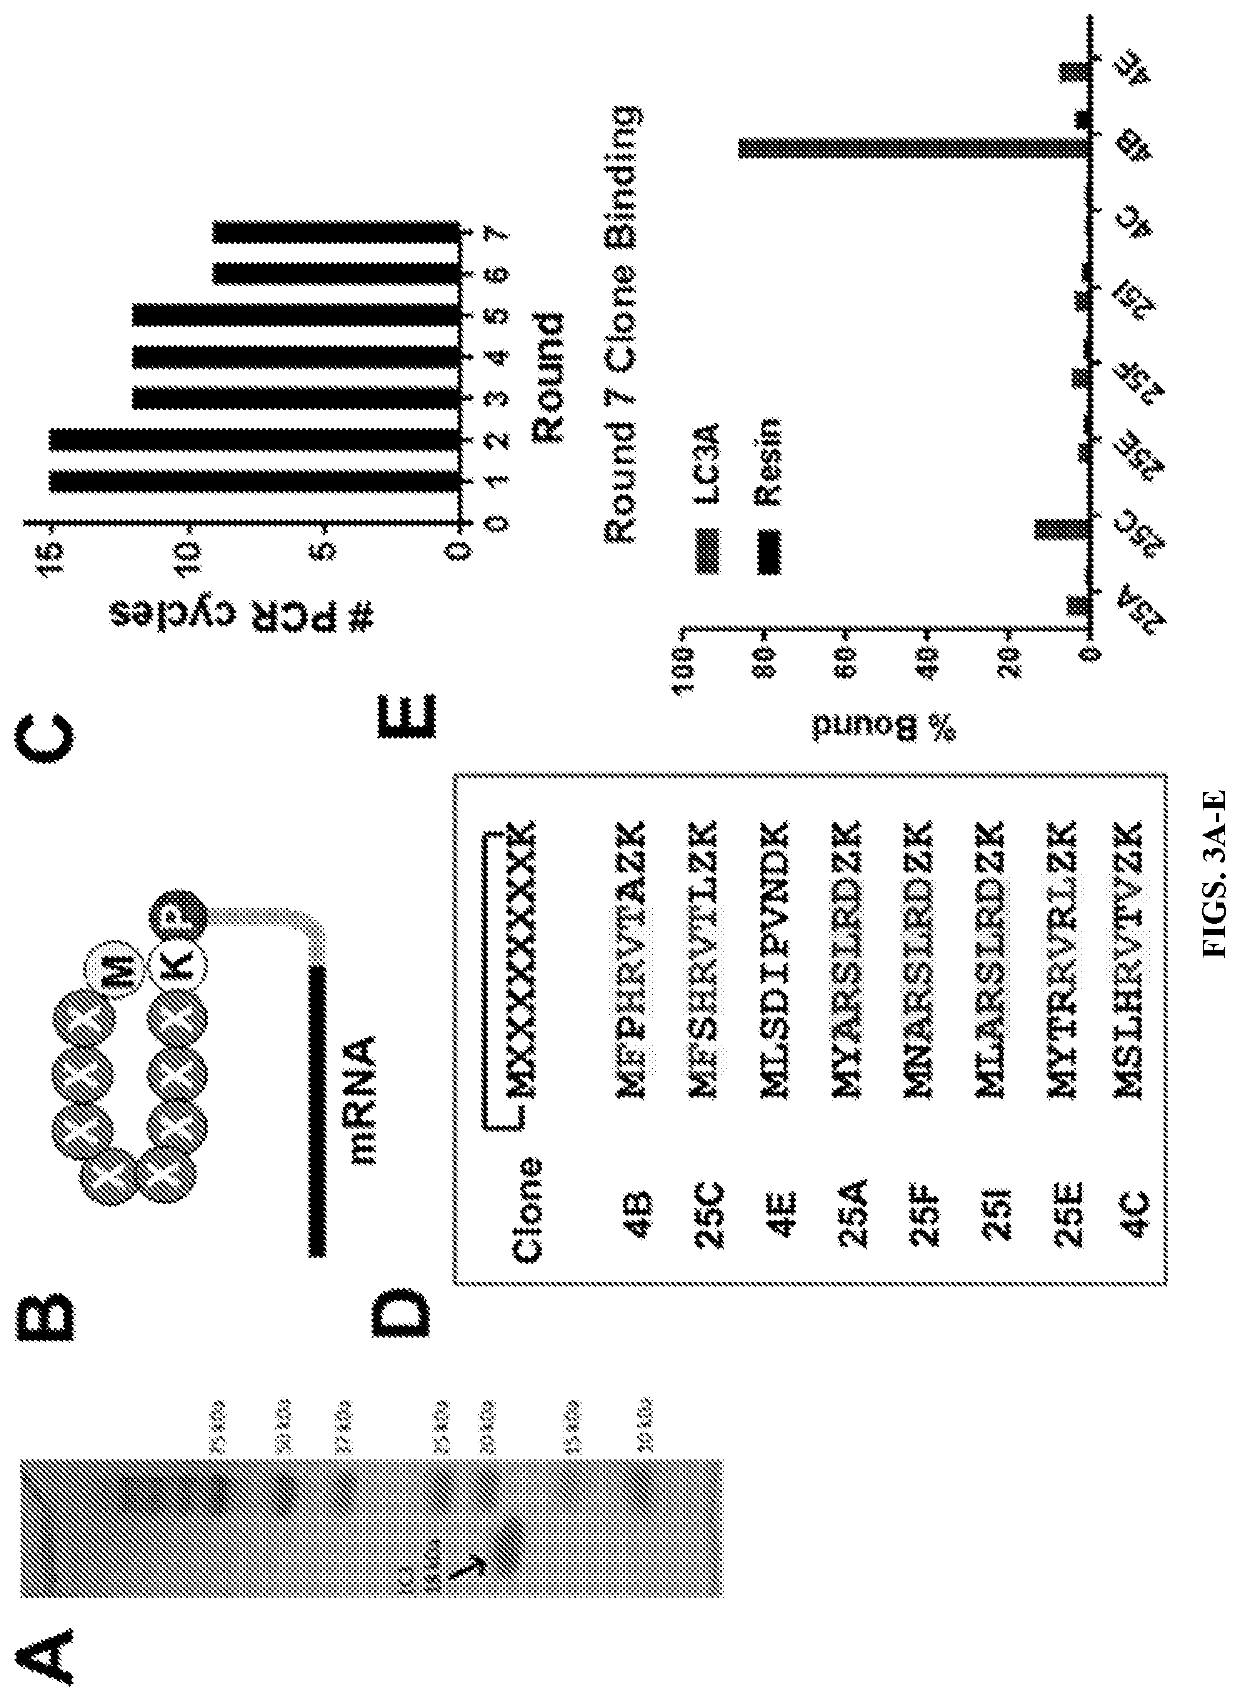 Macrocyclic peptides for targeted inhibition of autophagy